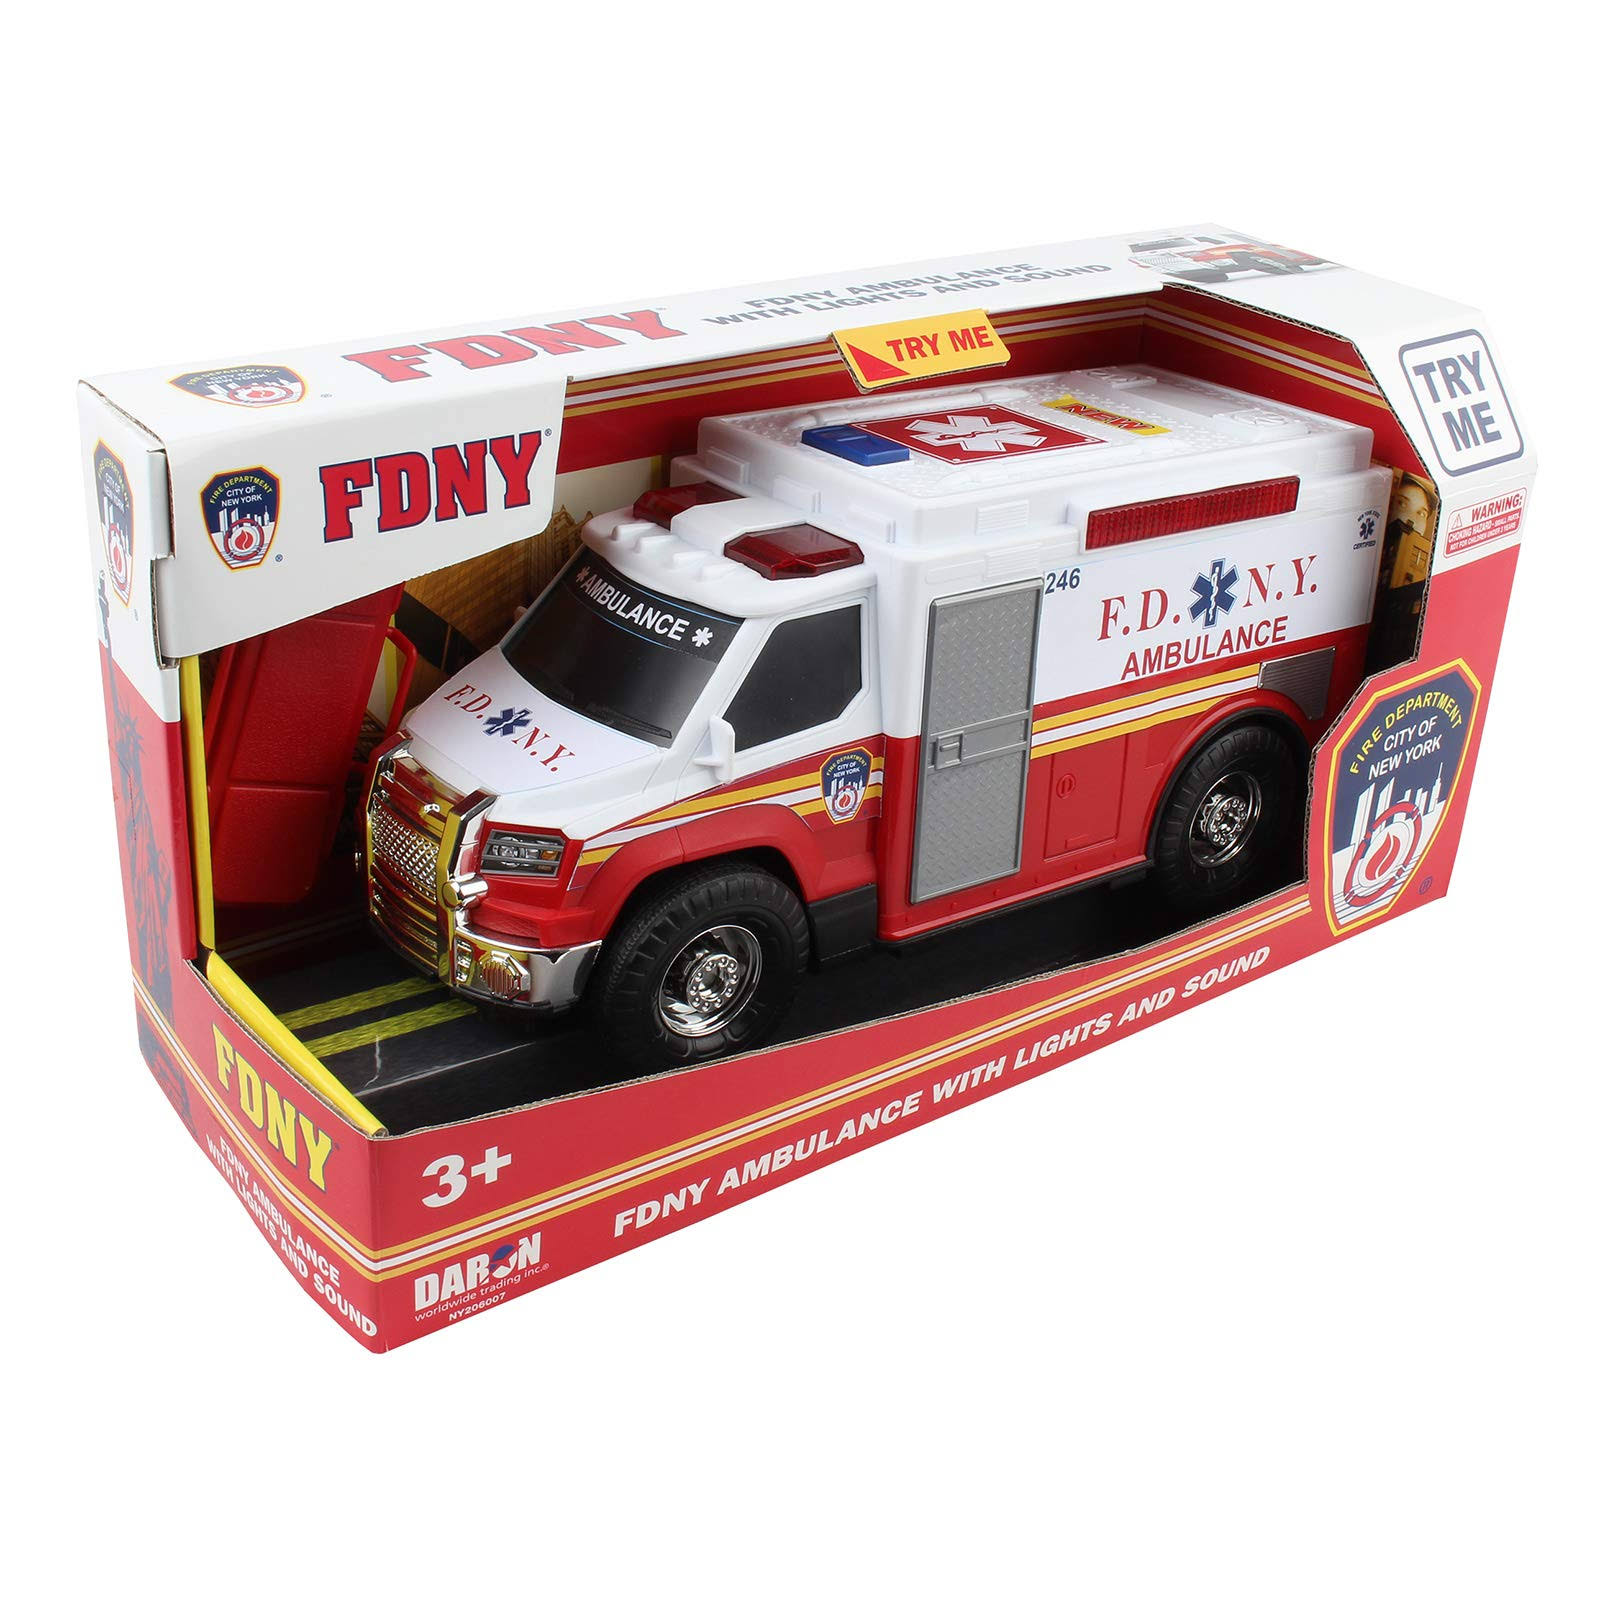 Daron Worldwide Trading NY206007 4.5 x 12 in. FDNY Ambulance with Lights & Sound